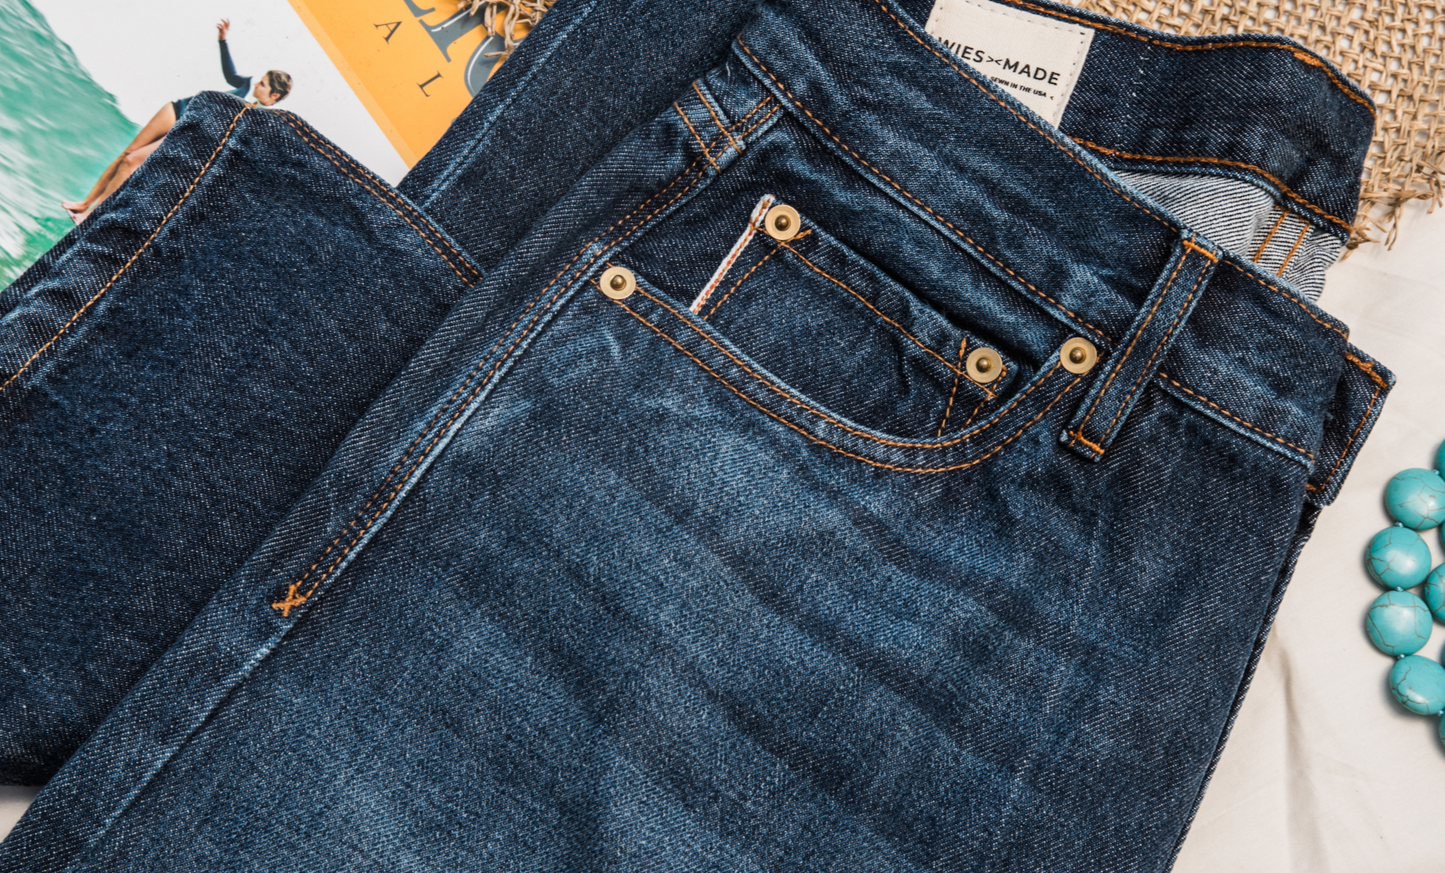 Sidney Fit Jean | Washed Selvedge Denim High Rise straight leg